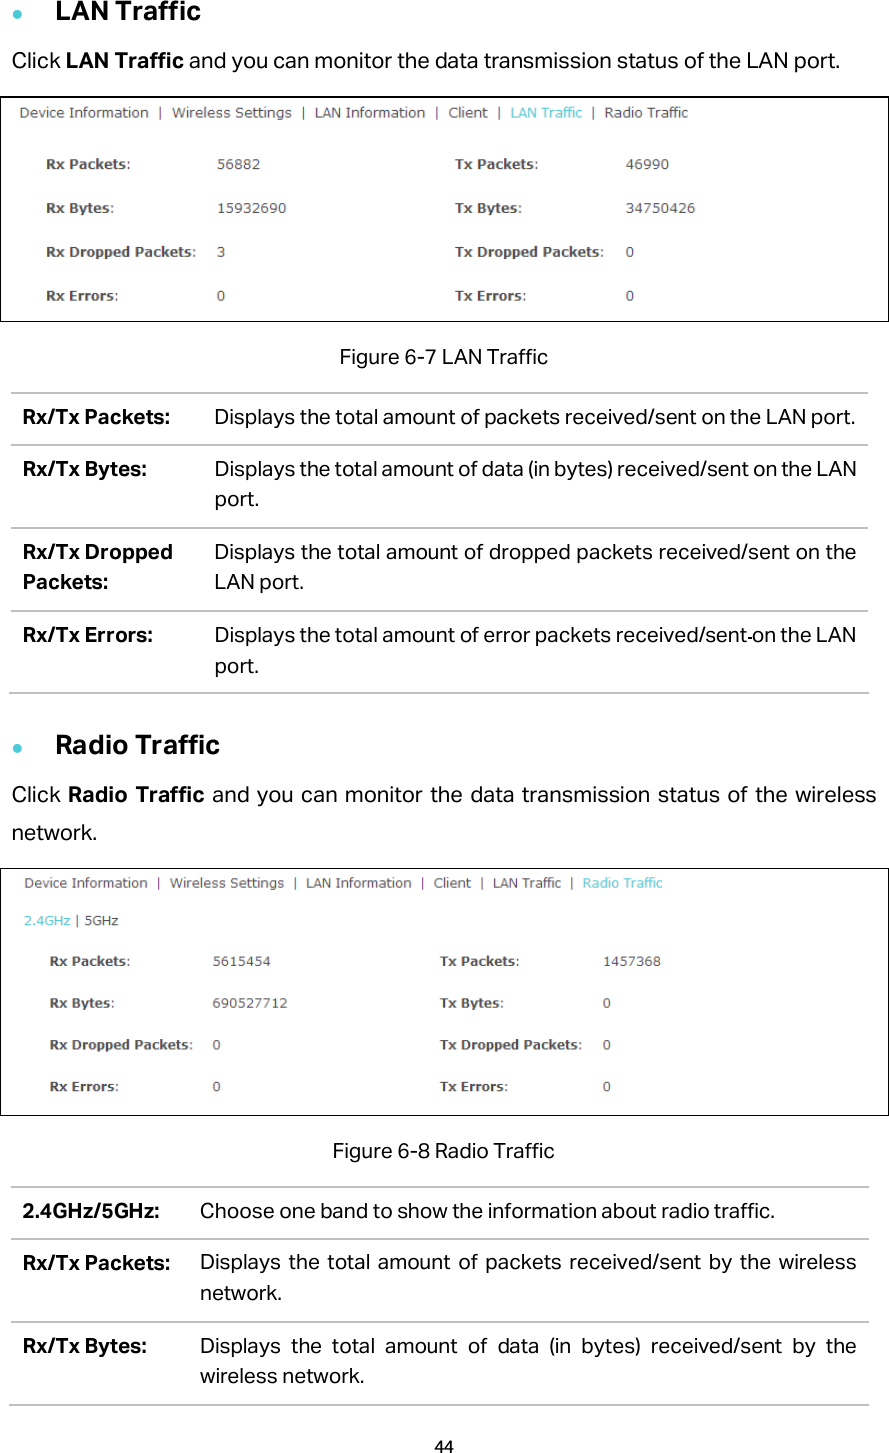  LAN Traffic Click LAN Traffic and you can monitor the data transmission status of the LAN port.  Figure 6-7 LAN Traffic Rx/Tx Packets: Displays the total amount of packets received/sent on the LAN port. Rx/Tx Bytes: Displays the total amount of data (in bytes) received/sent on the LAN port. Rx/Tx Dropped Packets: Displays the total amount of dropped packets received/sent on the LAN port. Rx/Tx Errors: Displays the total amount of error packets received/sent on the LAN port.  Radio Traffic Click Radio Traffic and you can monitor the data transmission status of the wireless network.  Figure 6-8 Radio Traffic 2.4GHz/5GHz: Choose one band to show the information about radio traffic. Rx/Tx Packets: Displays the total amount of packets received/sent by the wireless network. Rx/Tx Bytes: Displays the total amount of data (in bytes) received/sent by the wireless network. 44  